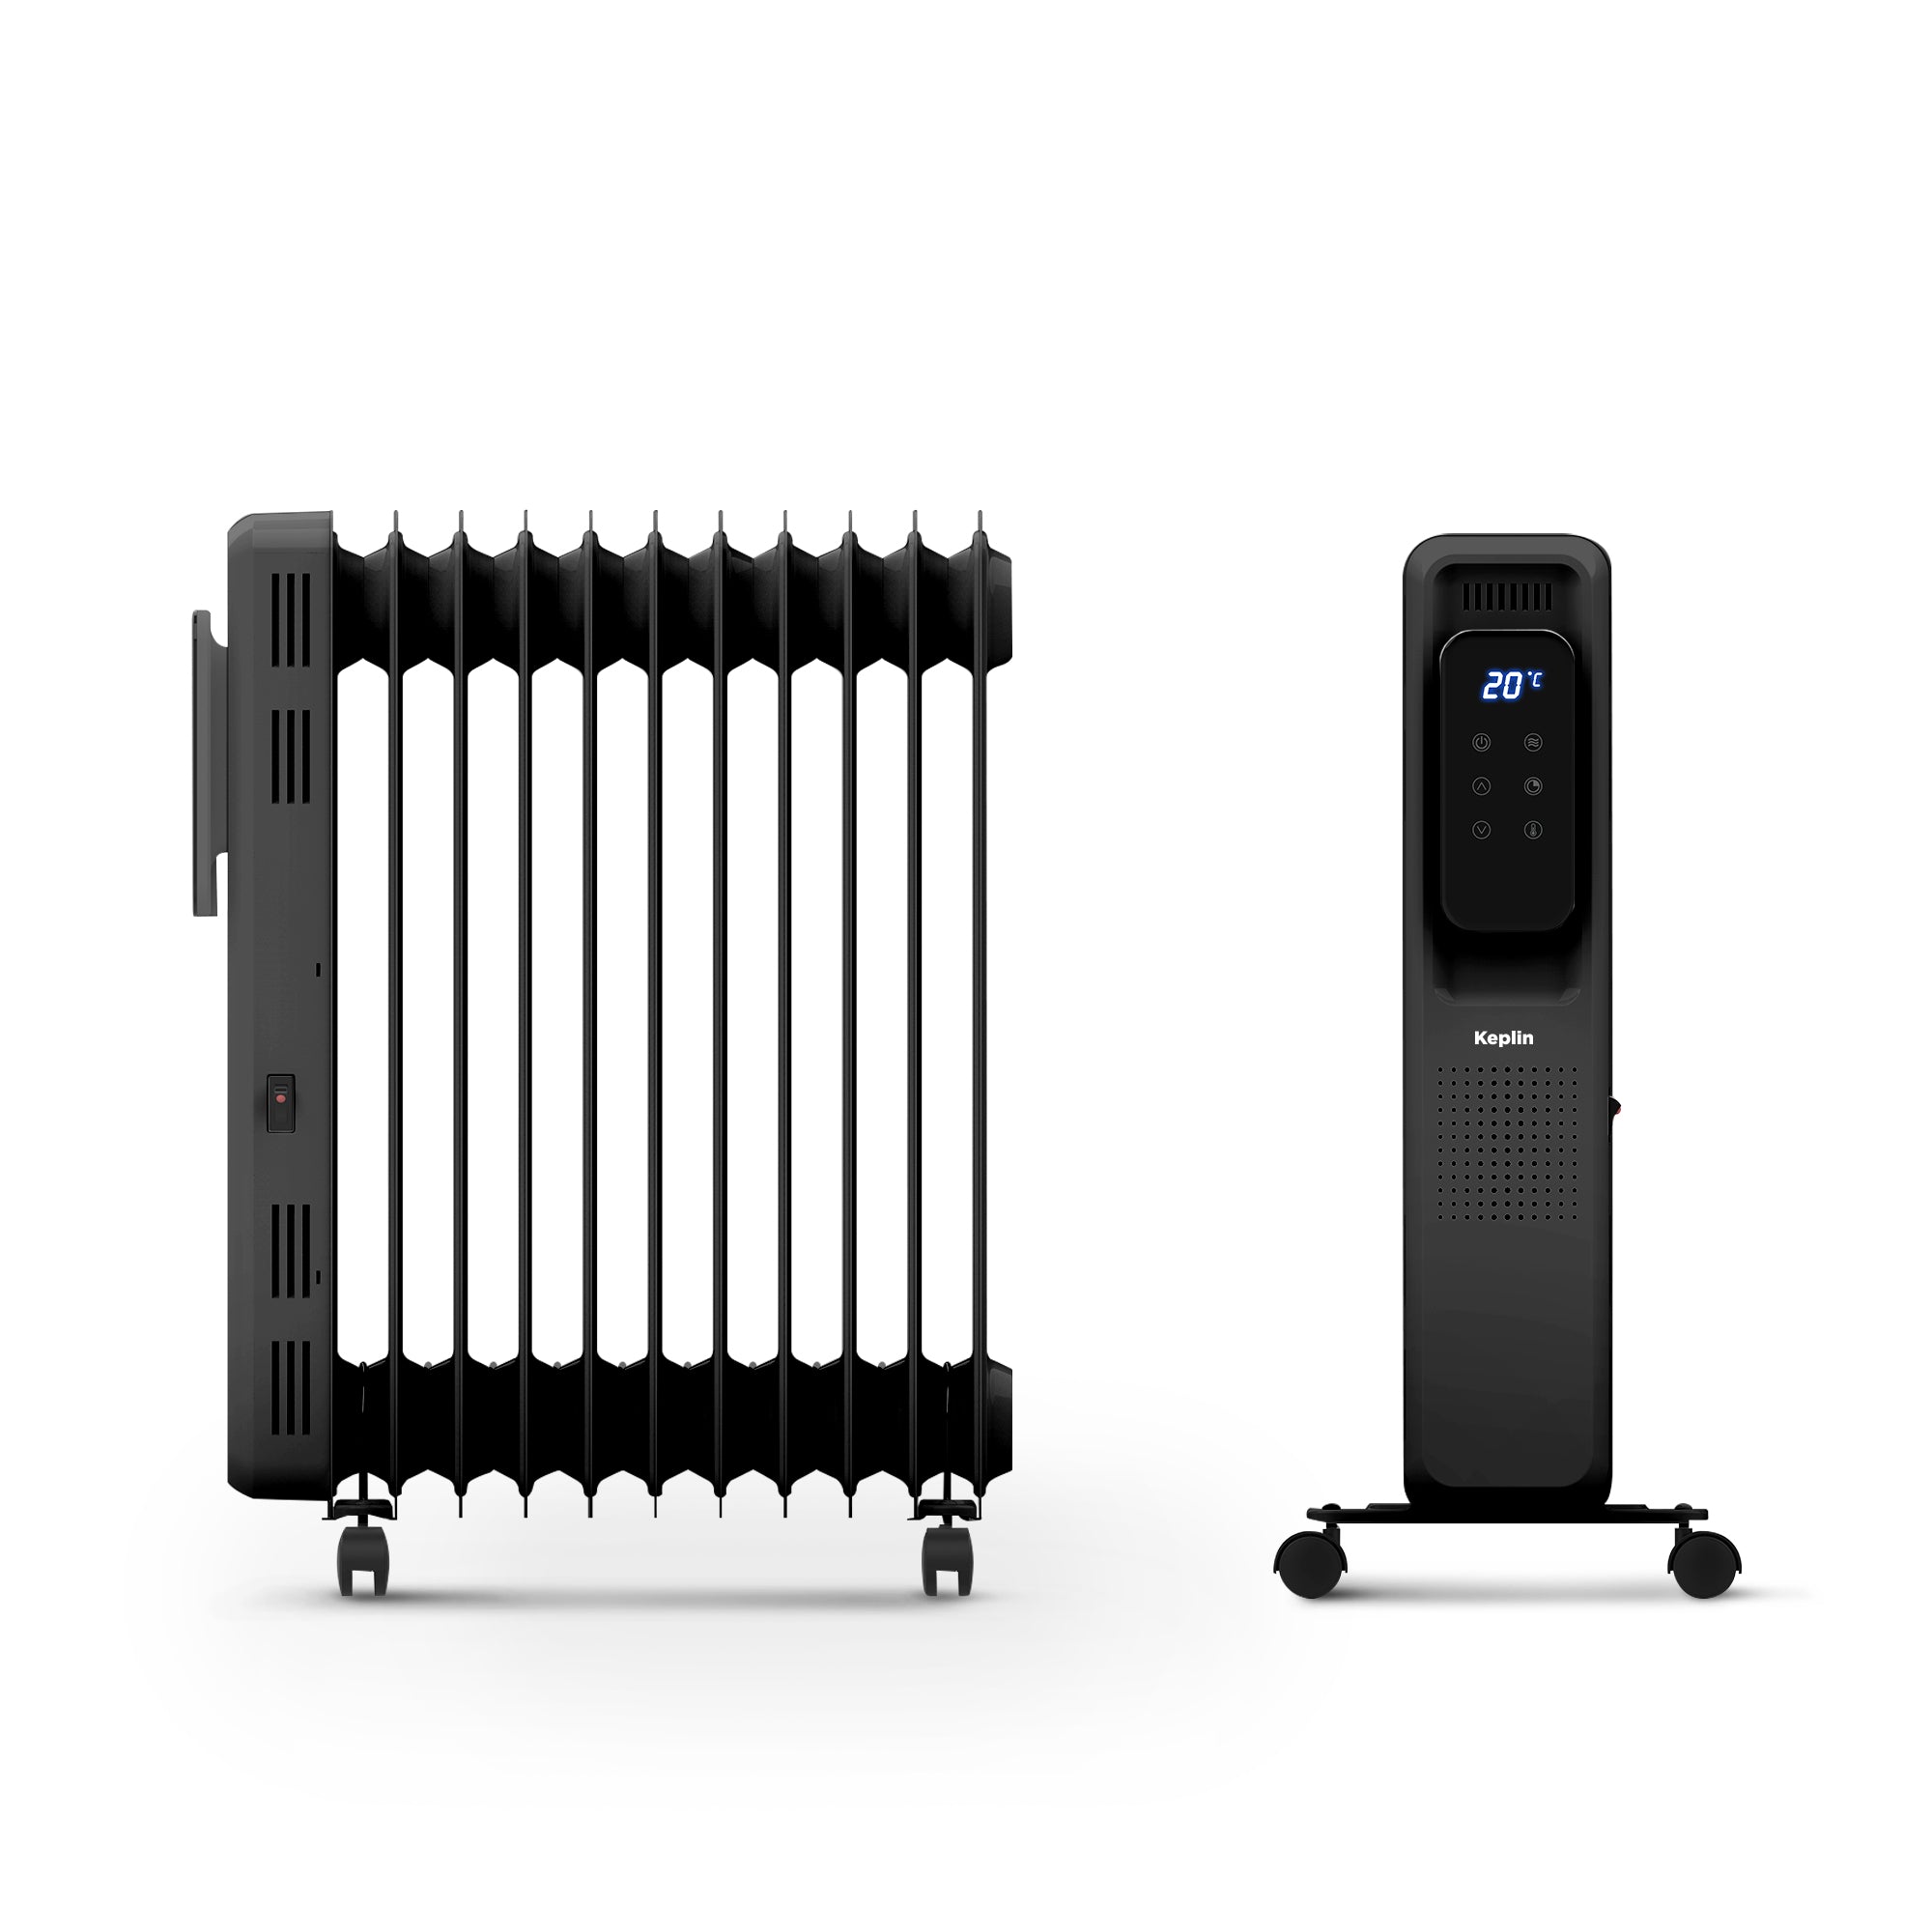 2500W Oil Filled Radiator With Digital Display - Efficient & Portable Electric Heater with Remote